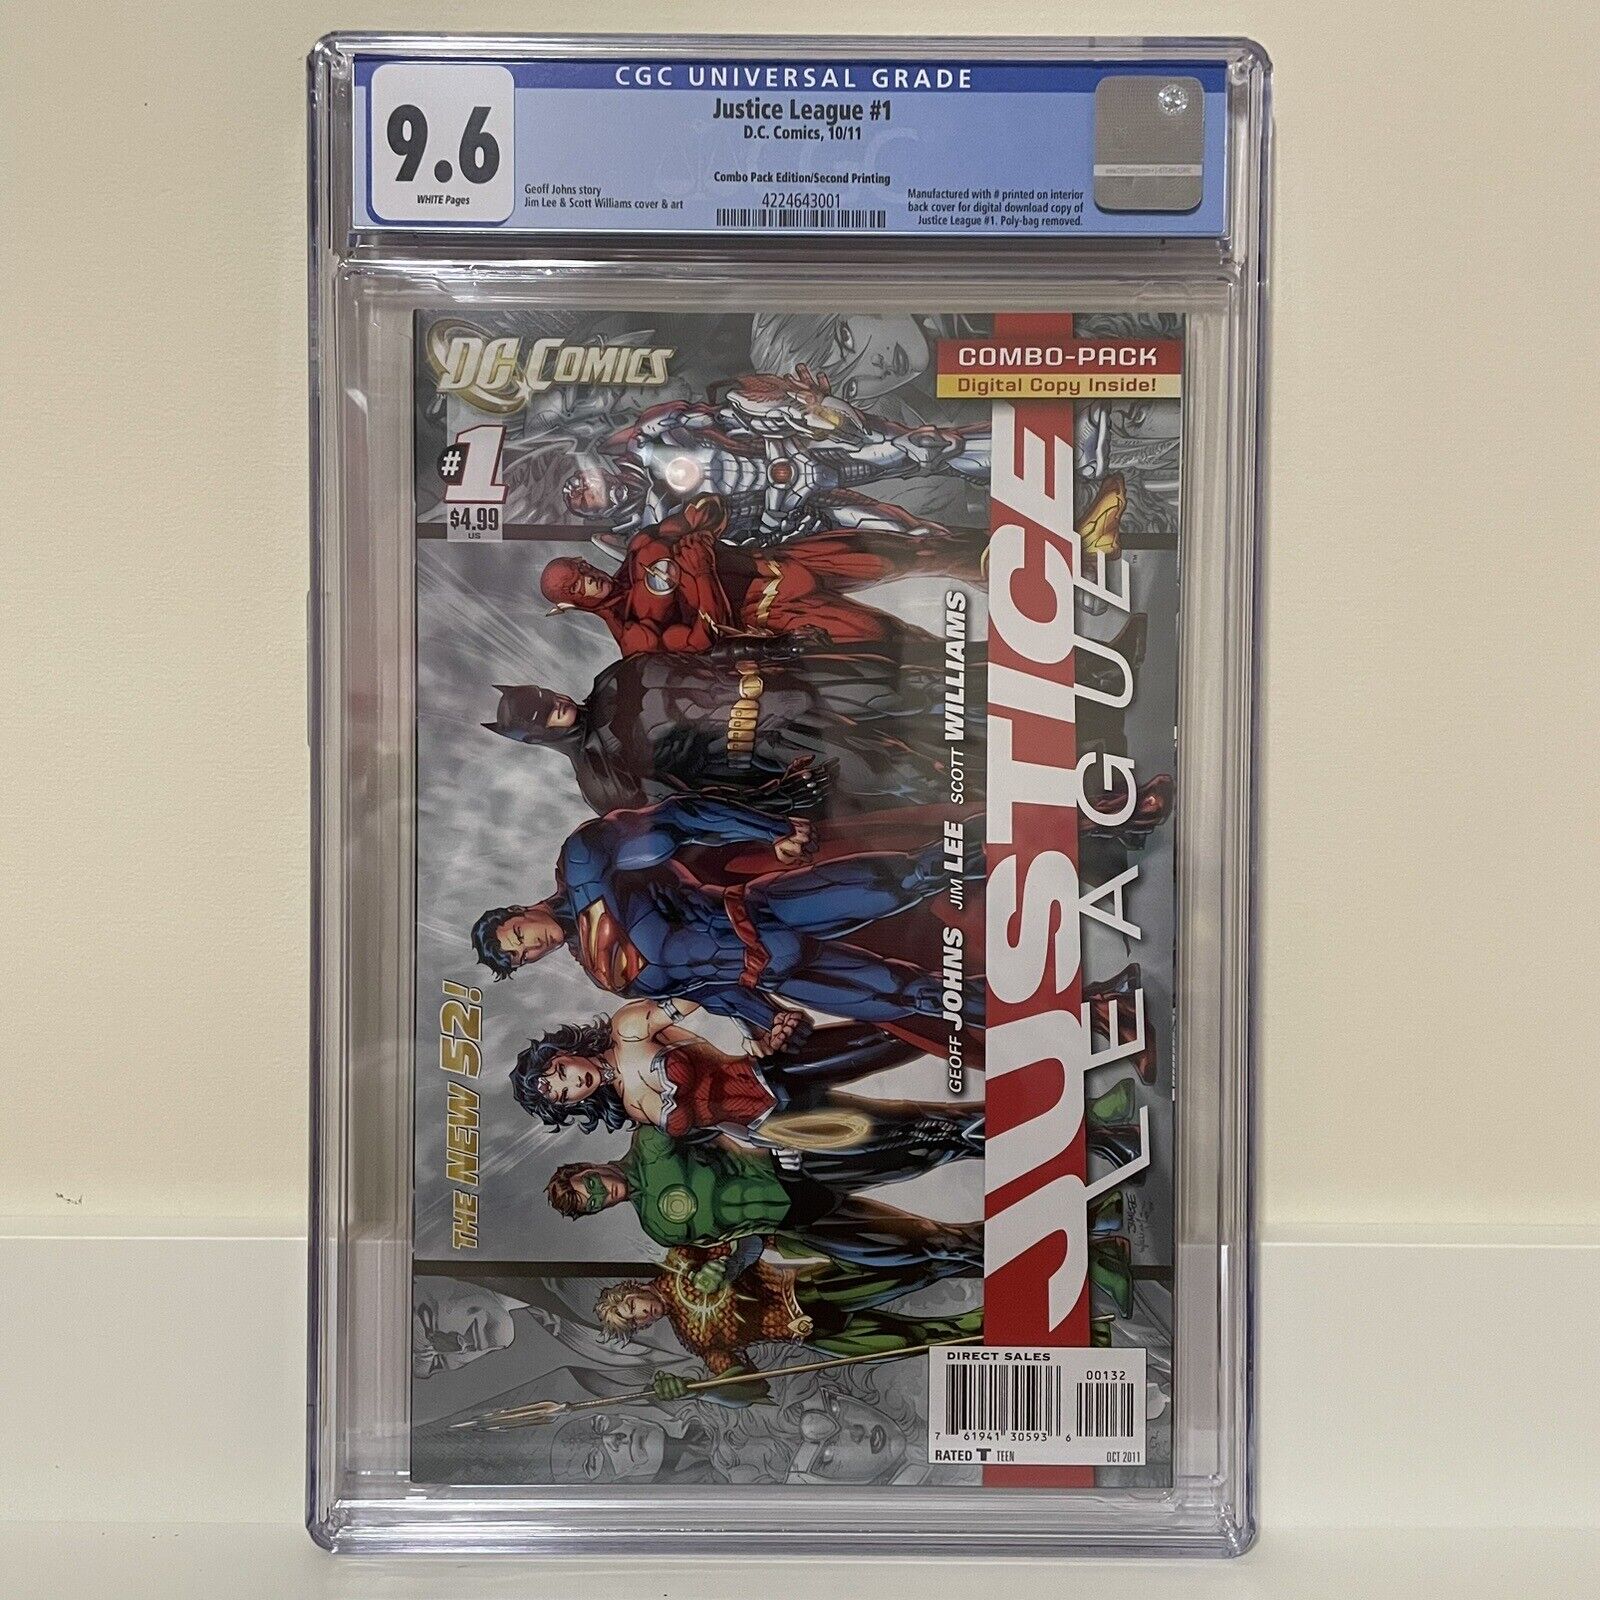 Justice League #1 2nd Print Combo Pack CGC 9.6 Jim Lee Geoff Johns (DC 2011)